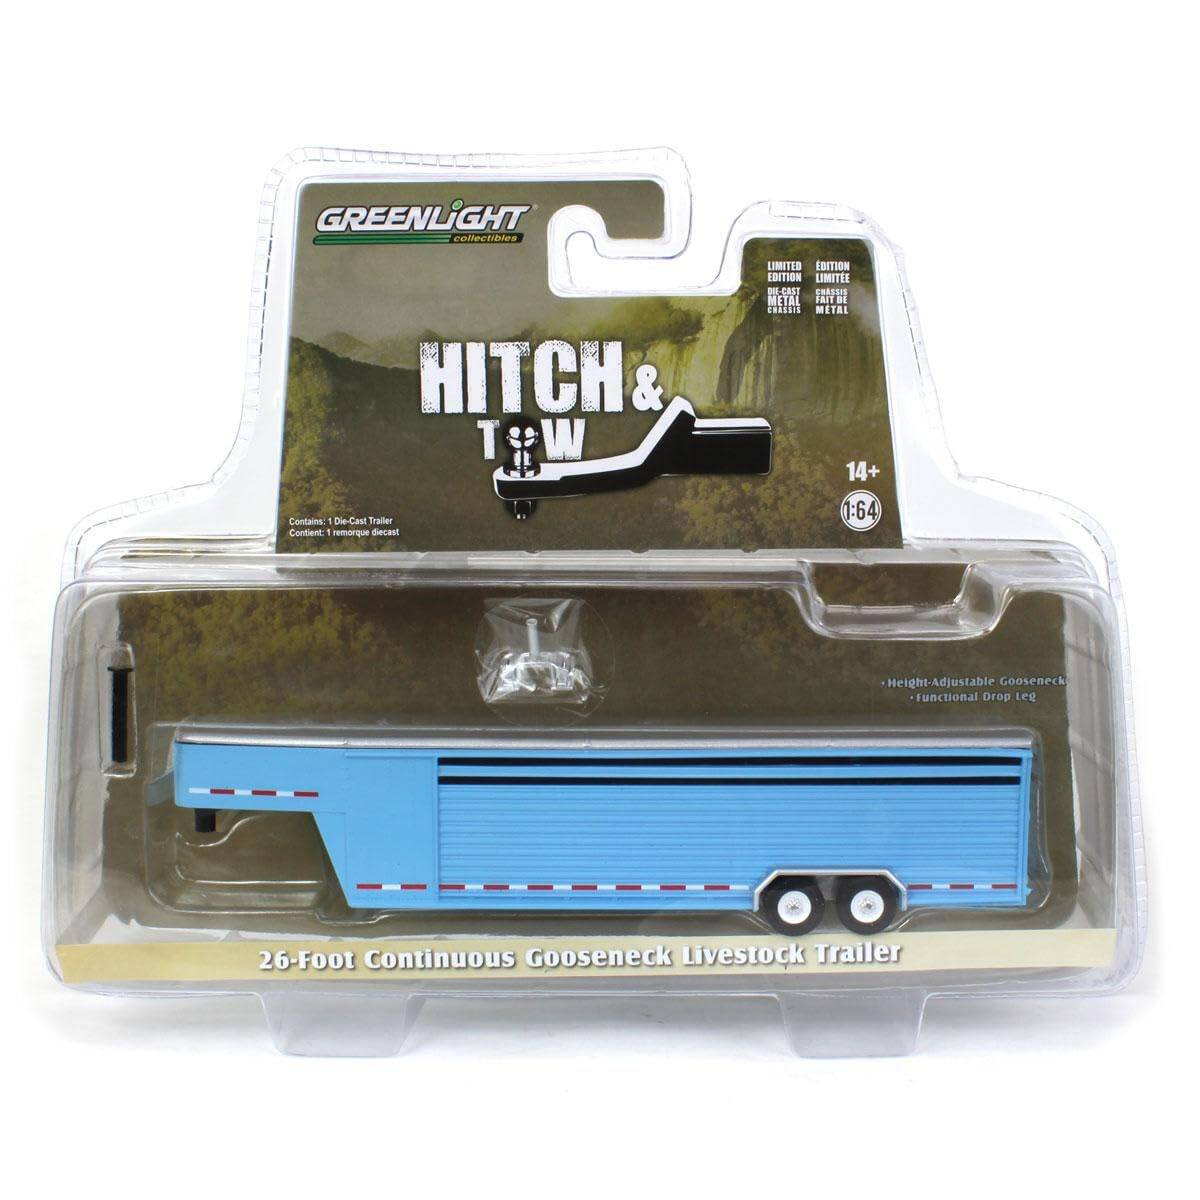 Greenlight 1:64 Hitch & Tow Trailers - 26-Foot Continuous Gooseneck Livestock Trailer - Light Blue (Hobby Exclusive) 30422